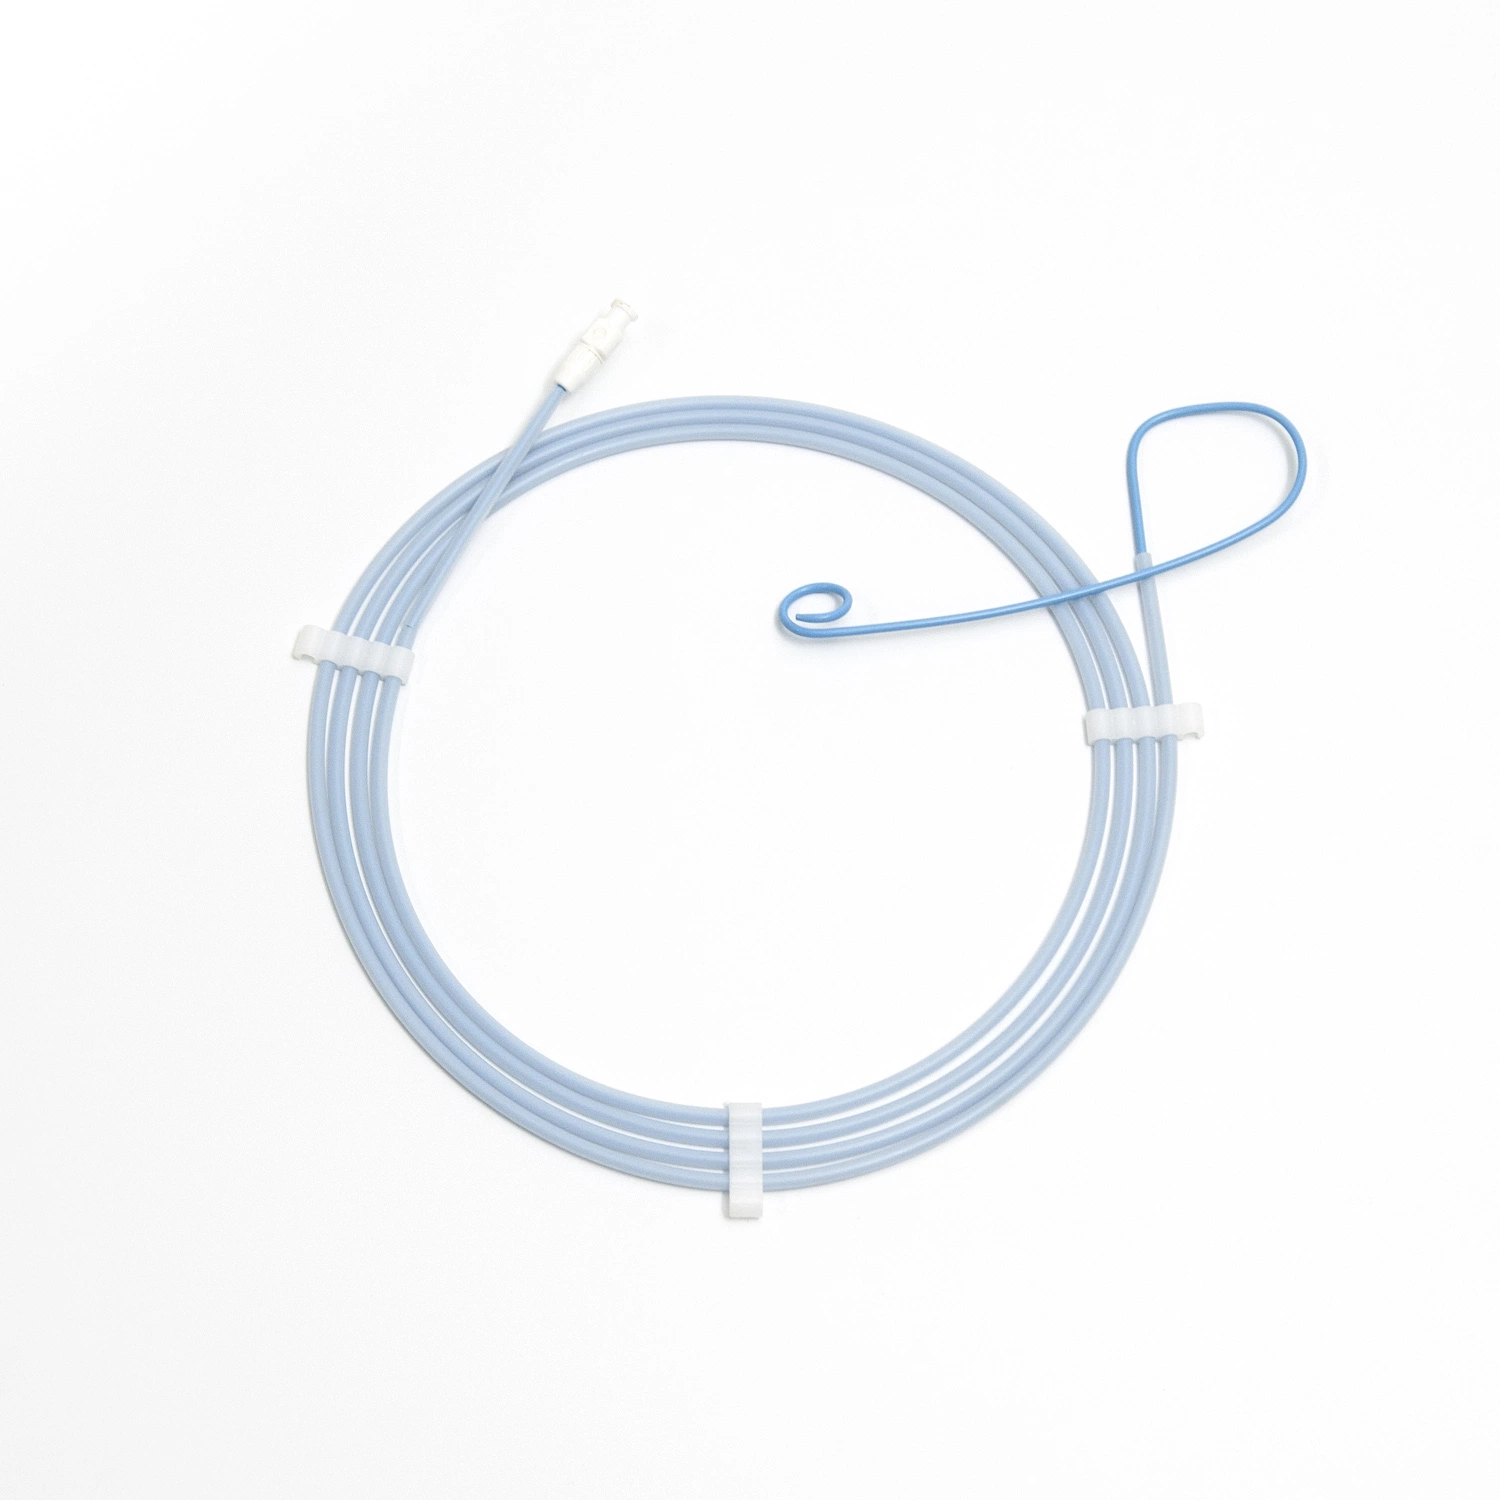 Sterile Disposable Nasal Biliary Drainage Catheter Insertion with Pigtail for Erpc